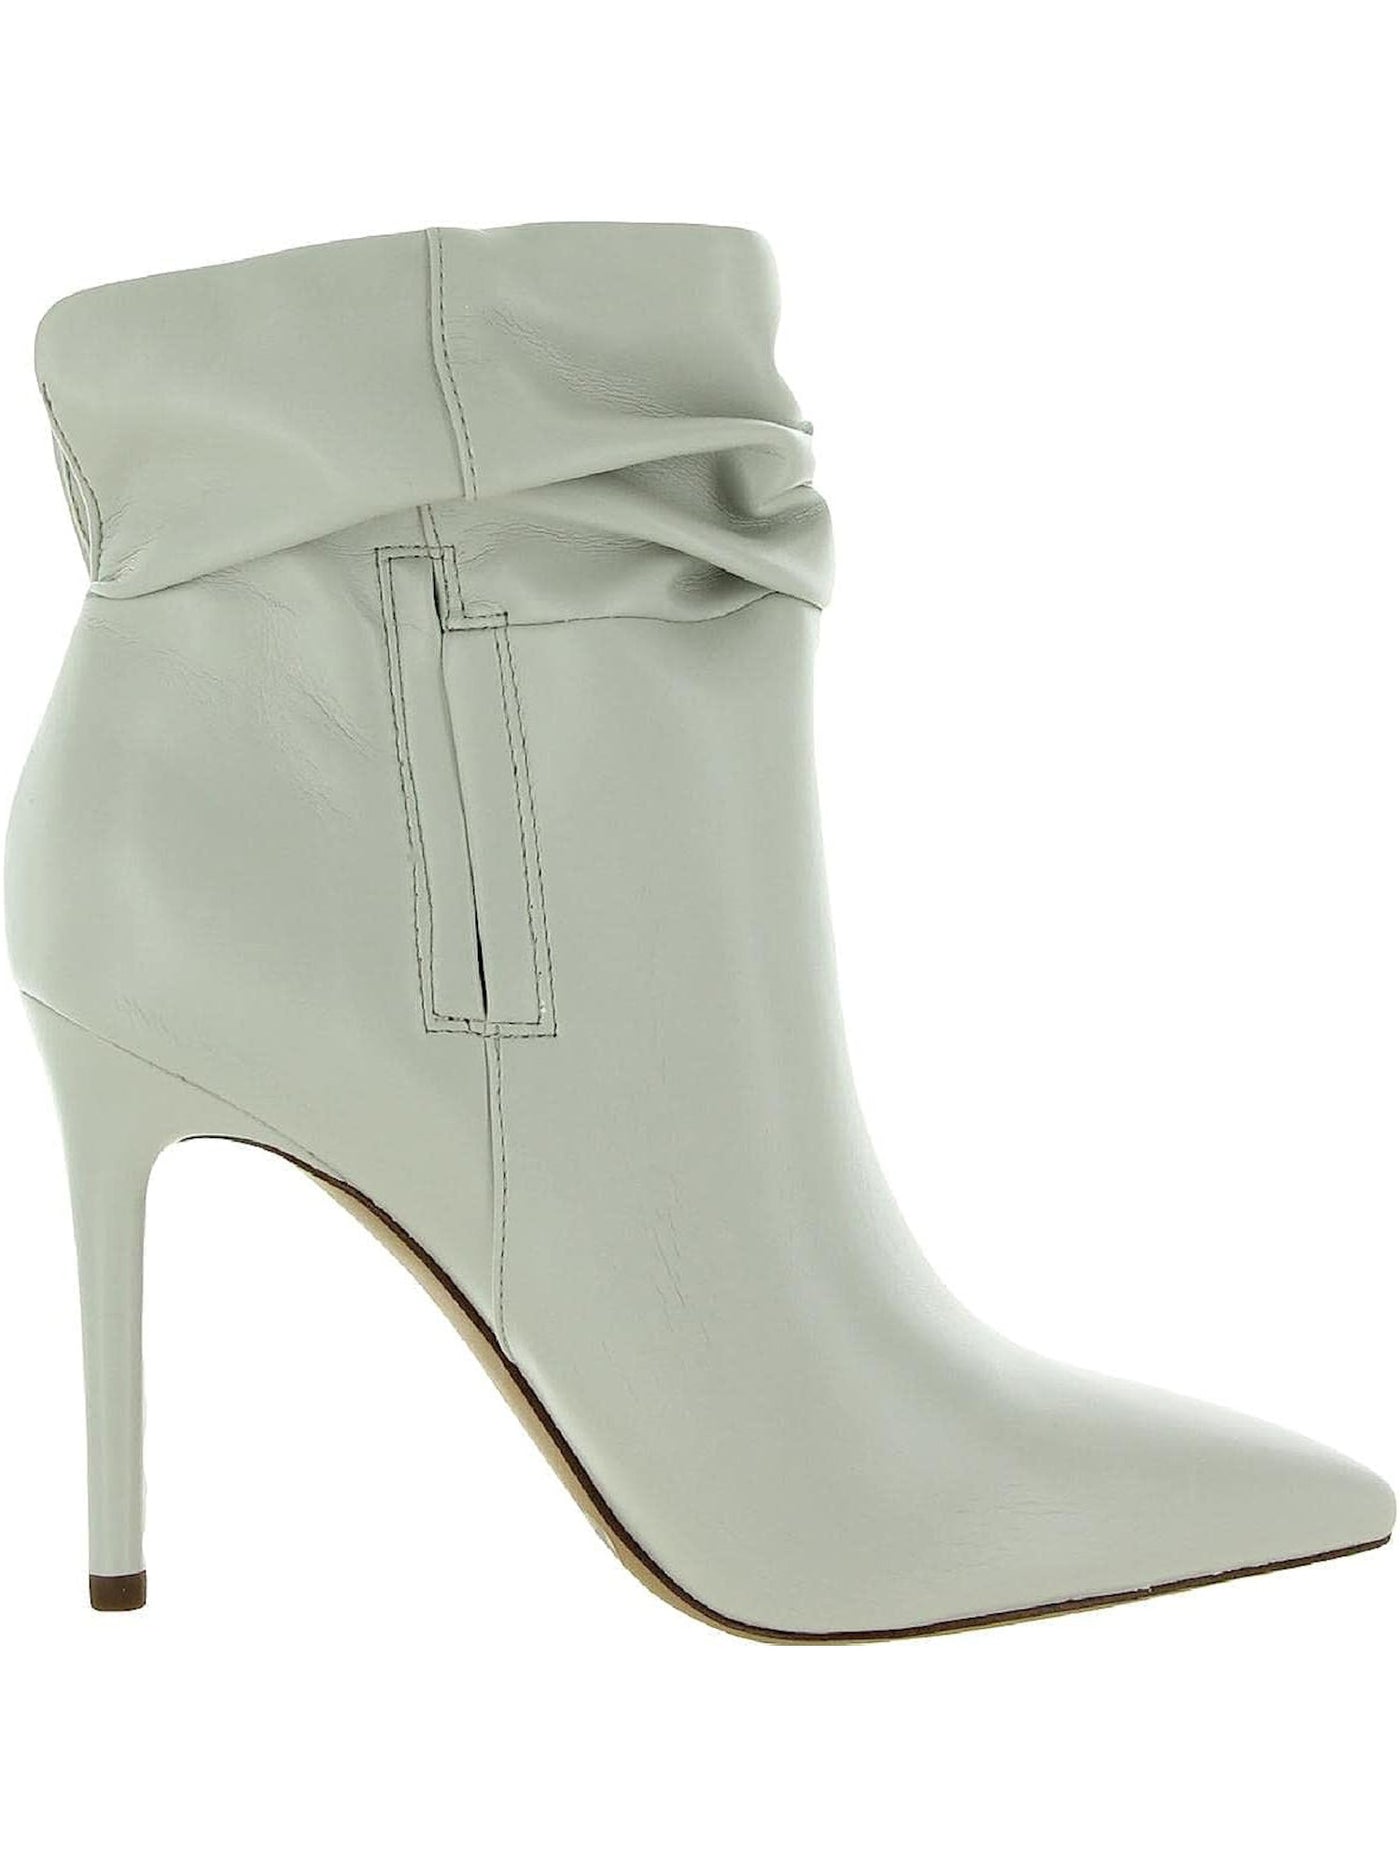 JESSICA SIMPSON Womens Ivory Comfort Lalie Pointed Toe Stiletto Dress Slouch Boot 9 M